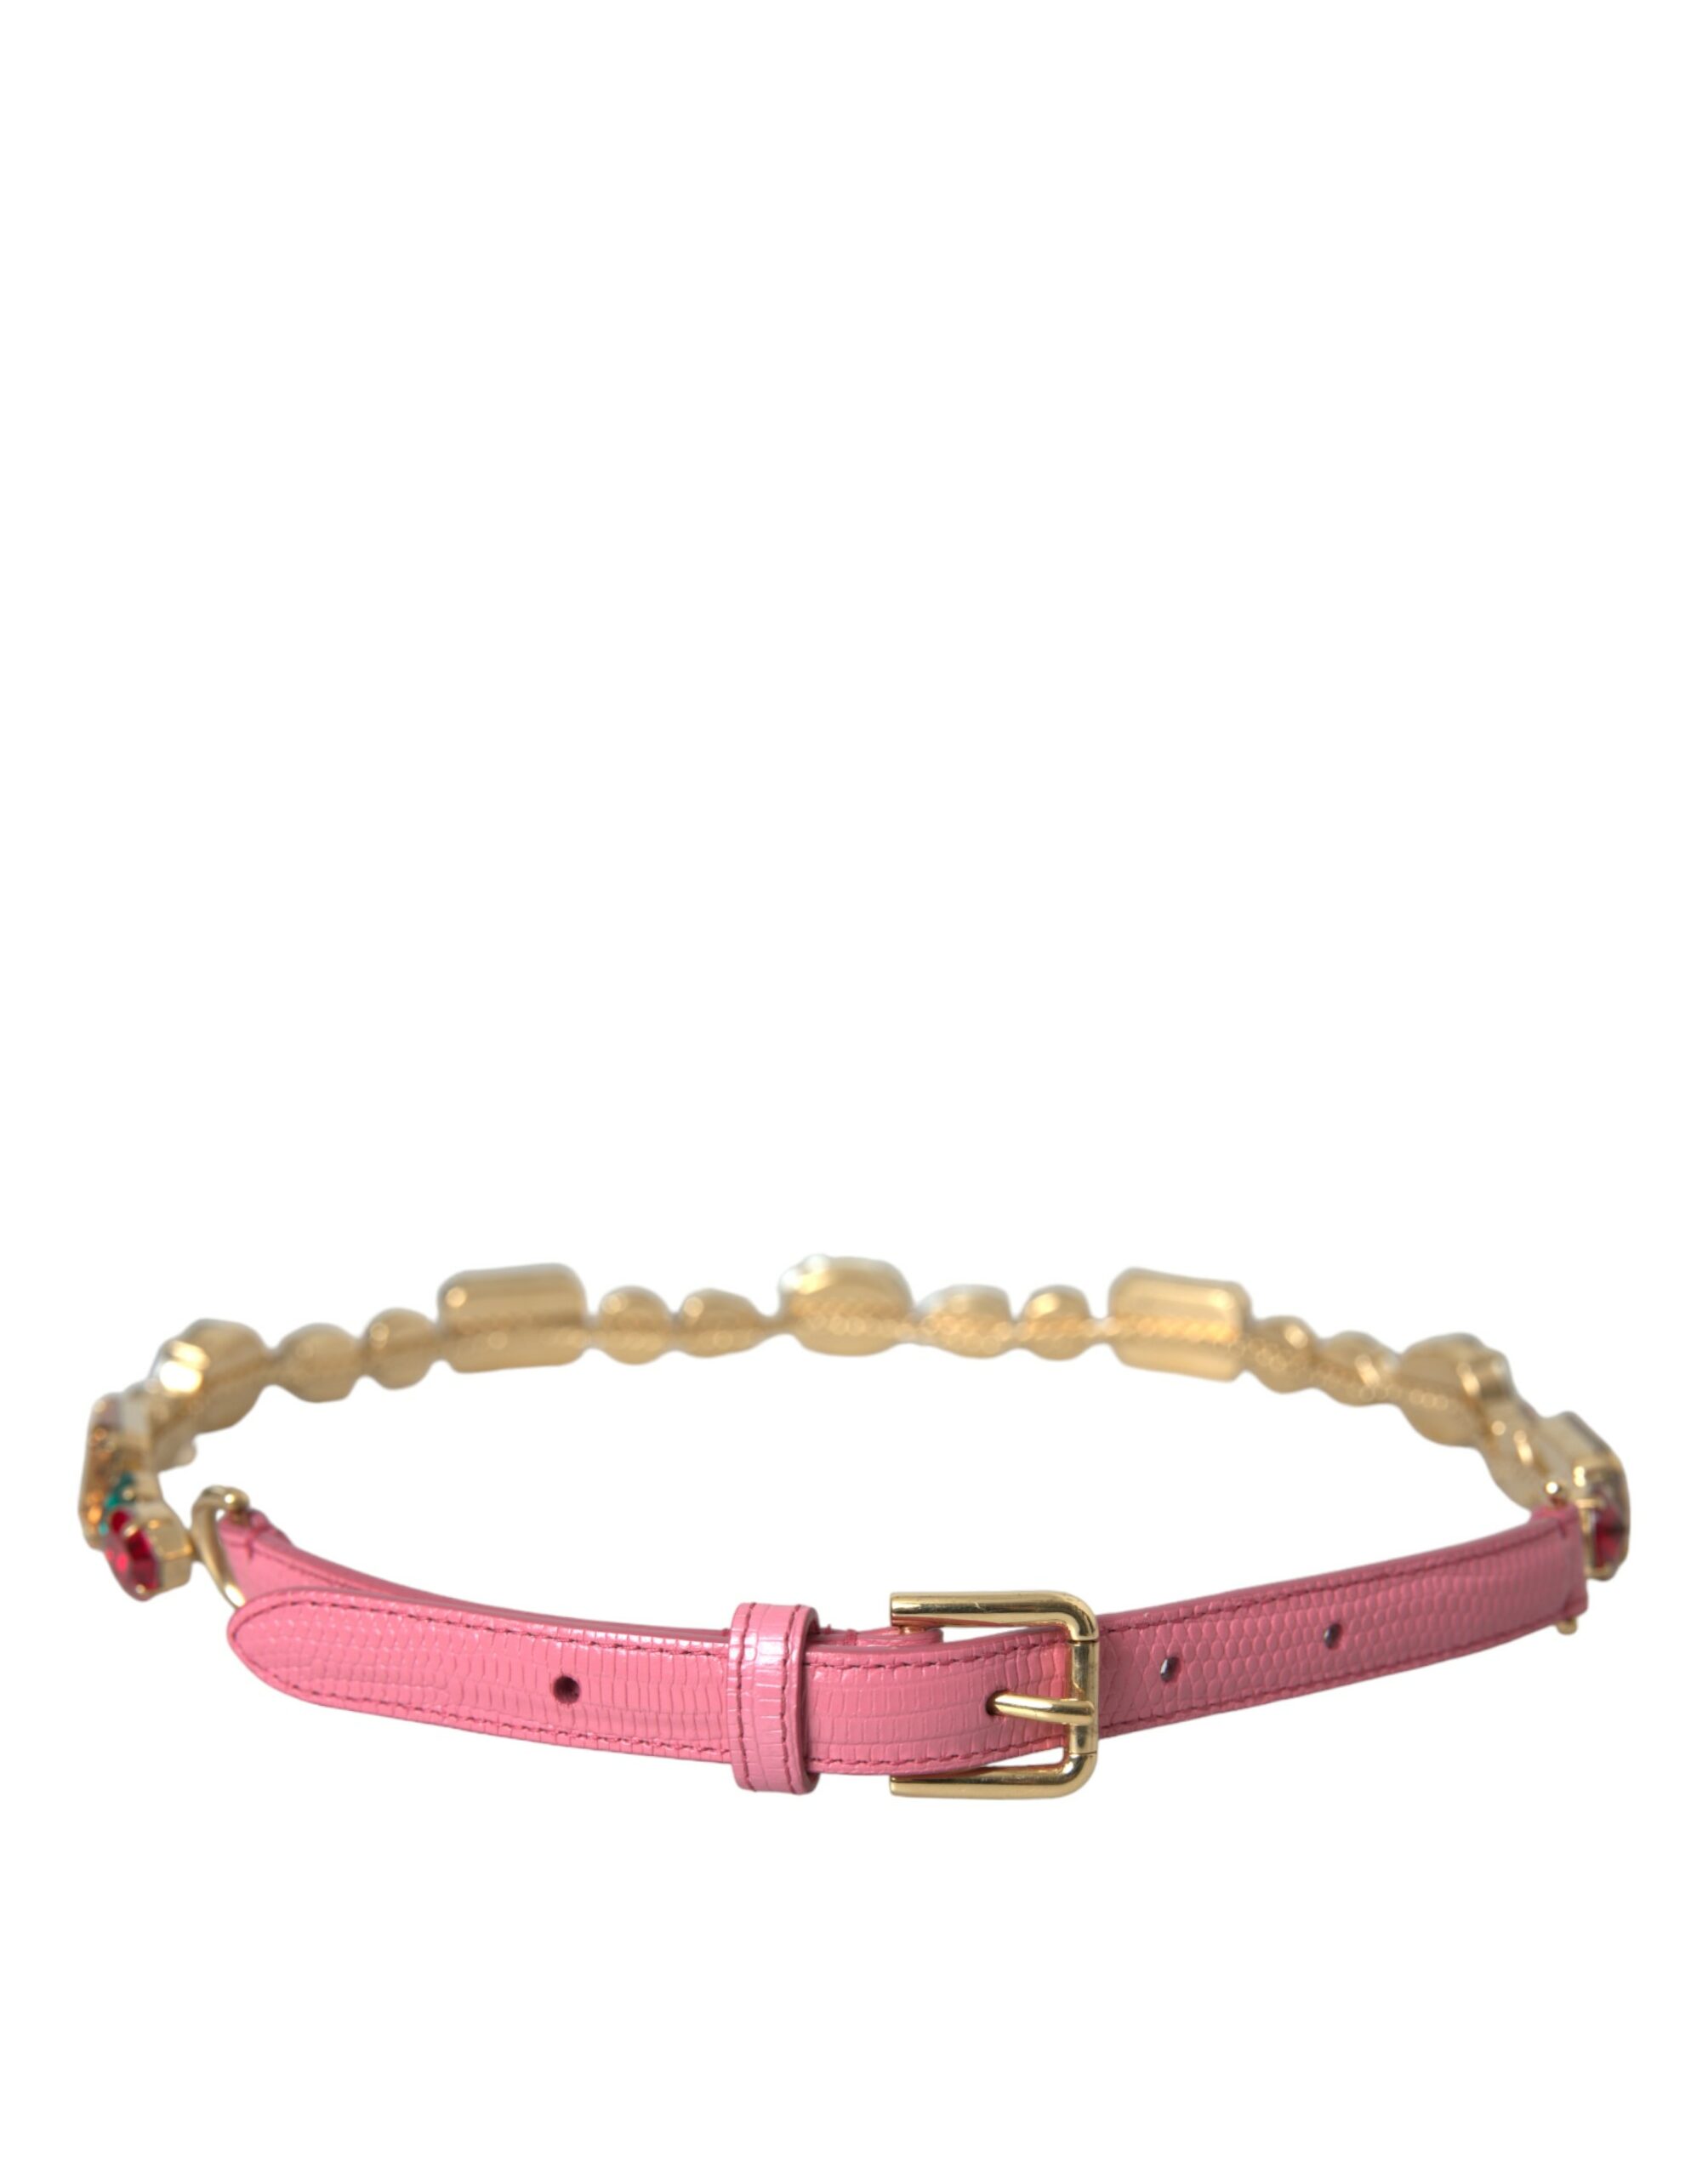 Dolce Gabbana Pink Leather Crystal Chain Embellished Belt 85 cm 34 Inches